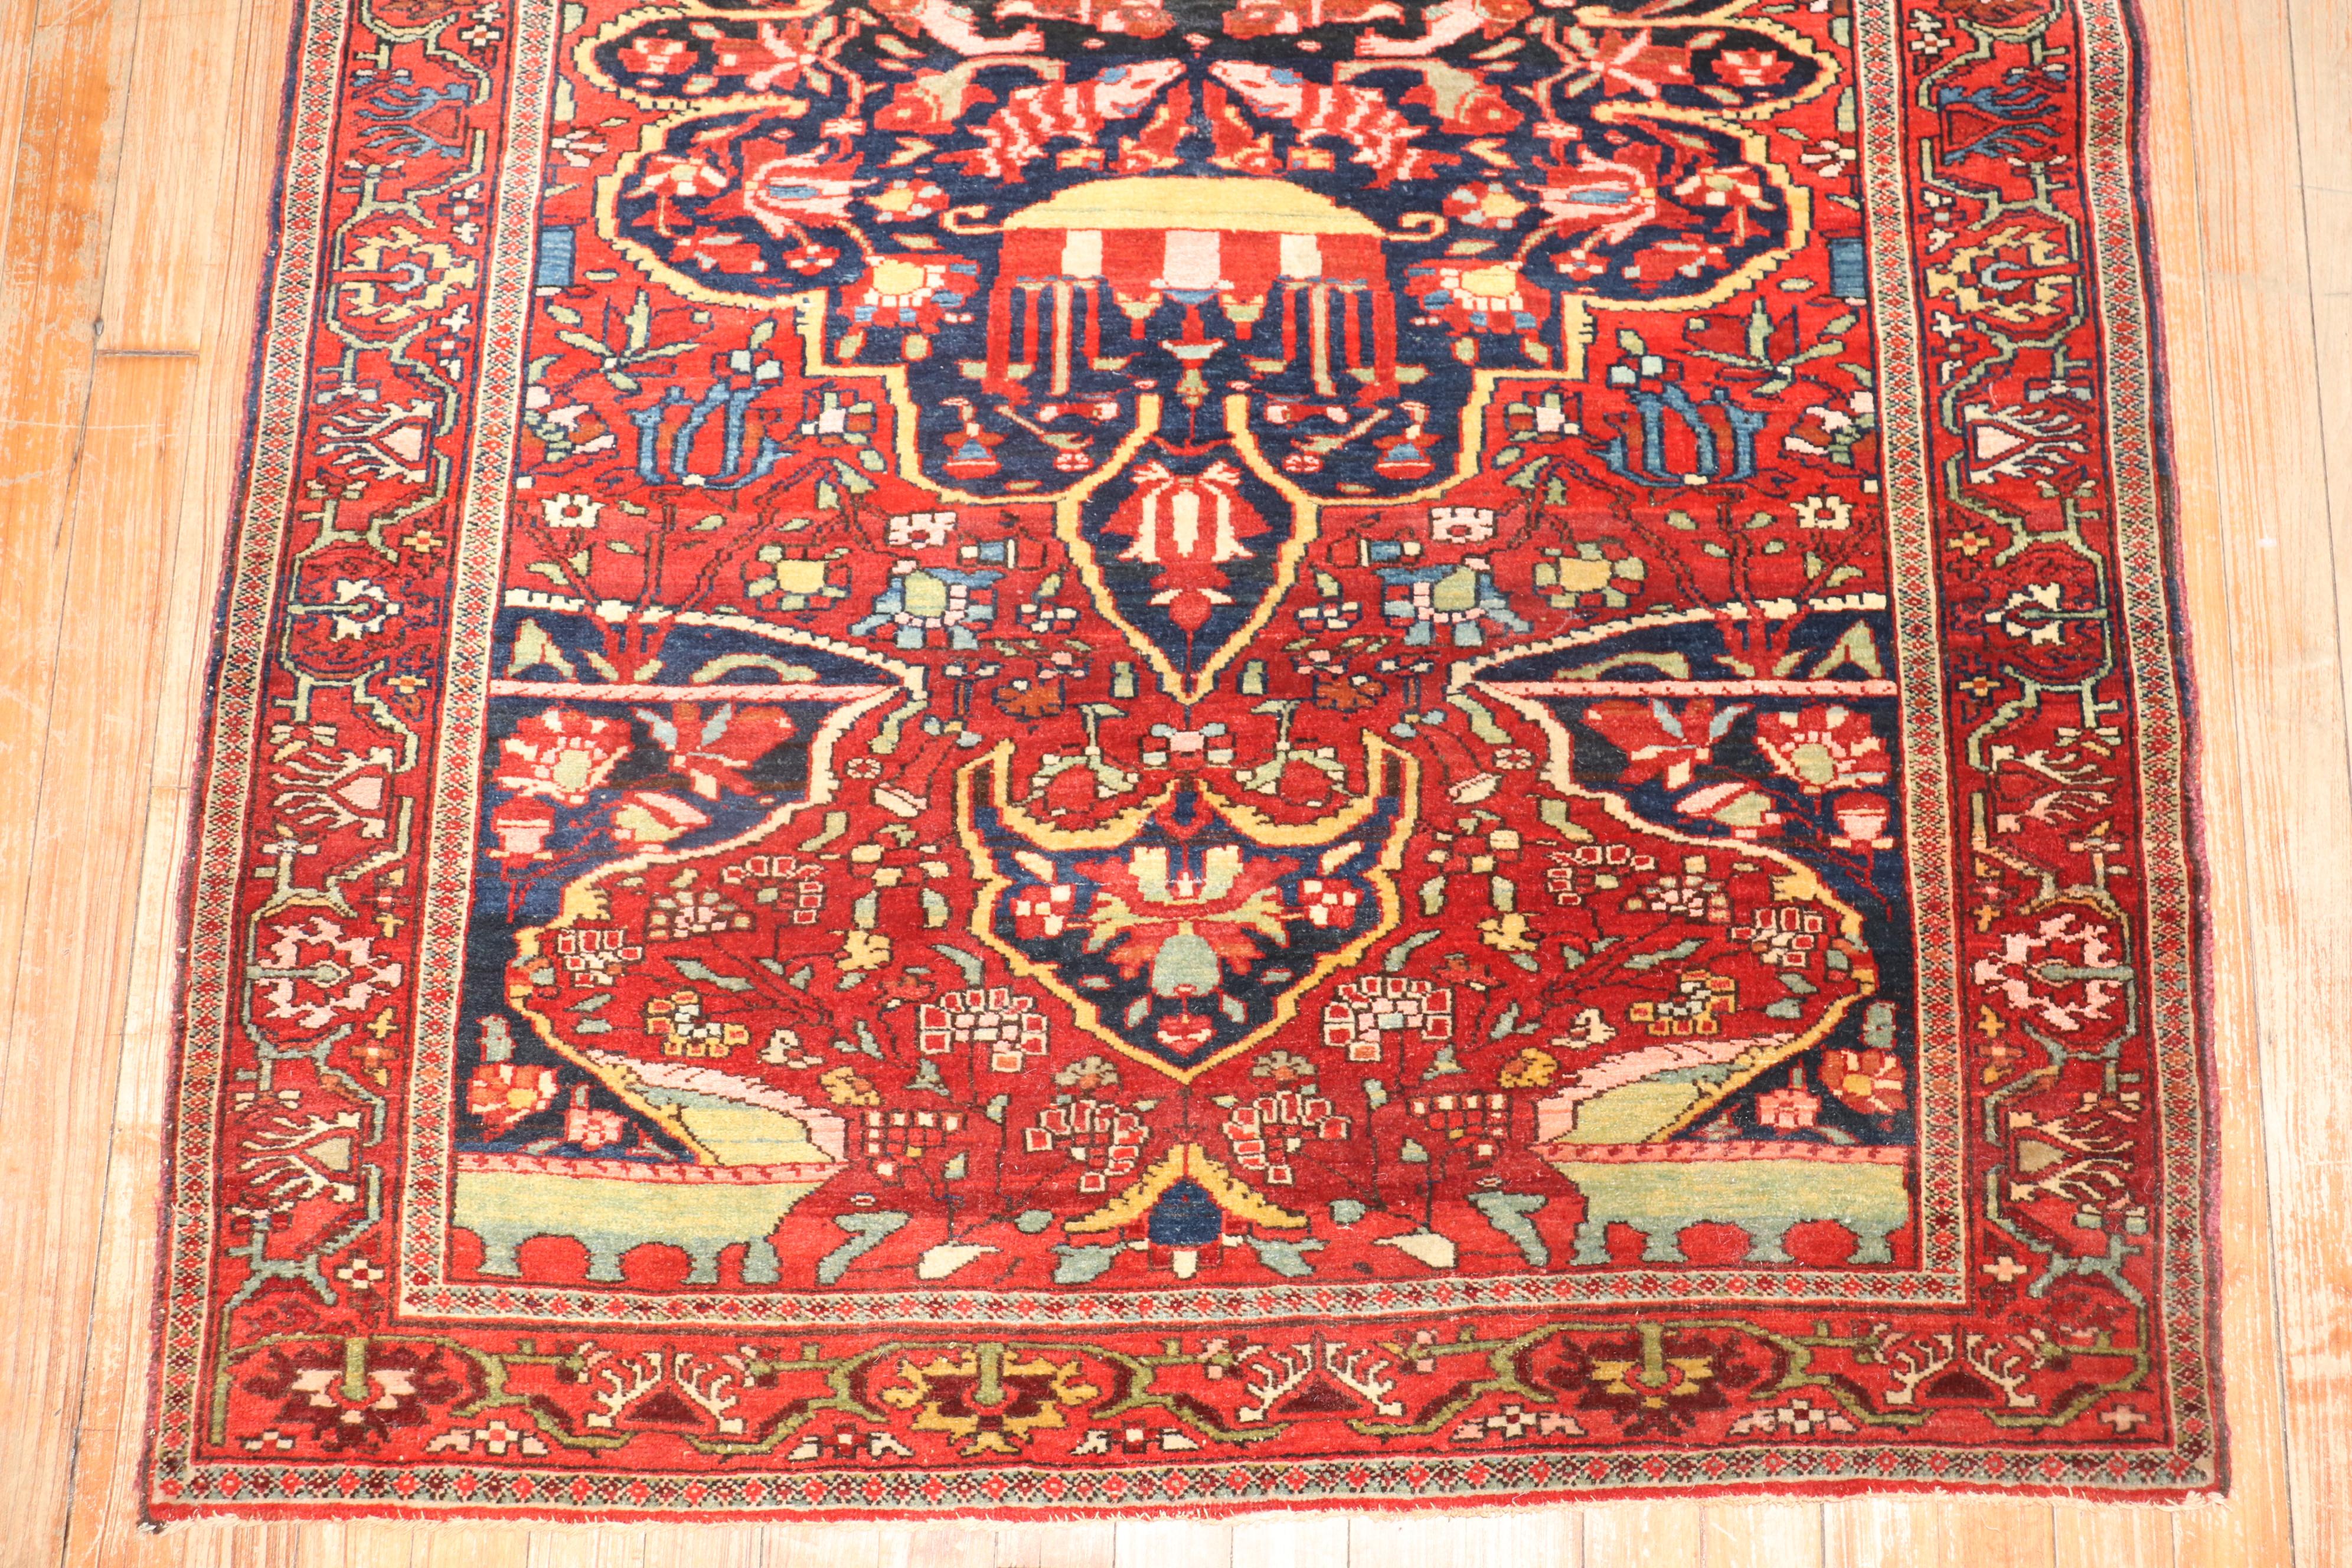 Super quality early 20th century Persian Sarouk Ferehan carpet. Deep red field and border with a navy blue medallion and accents in blue and green. 

Measures: ''3'5'' x 4'10''.